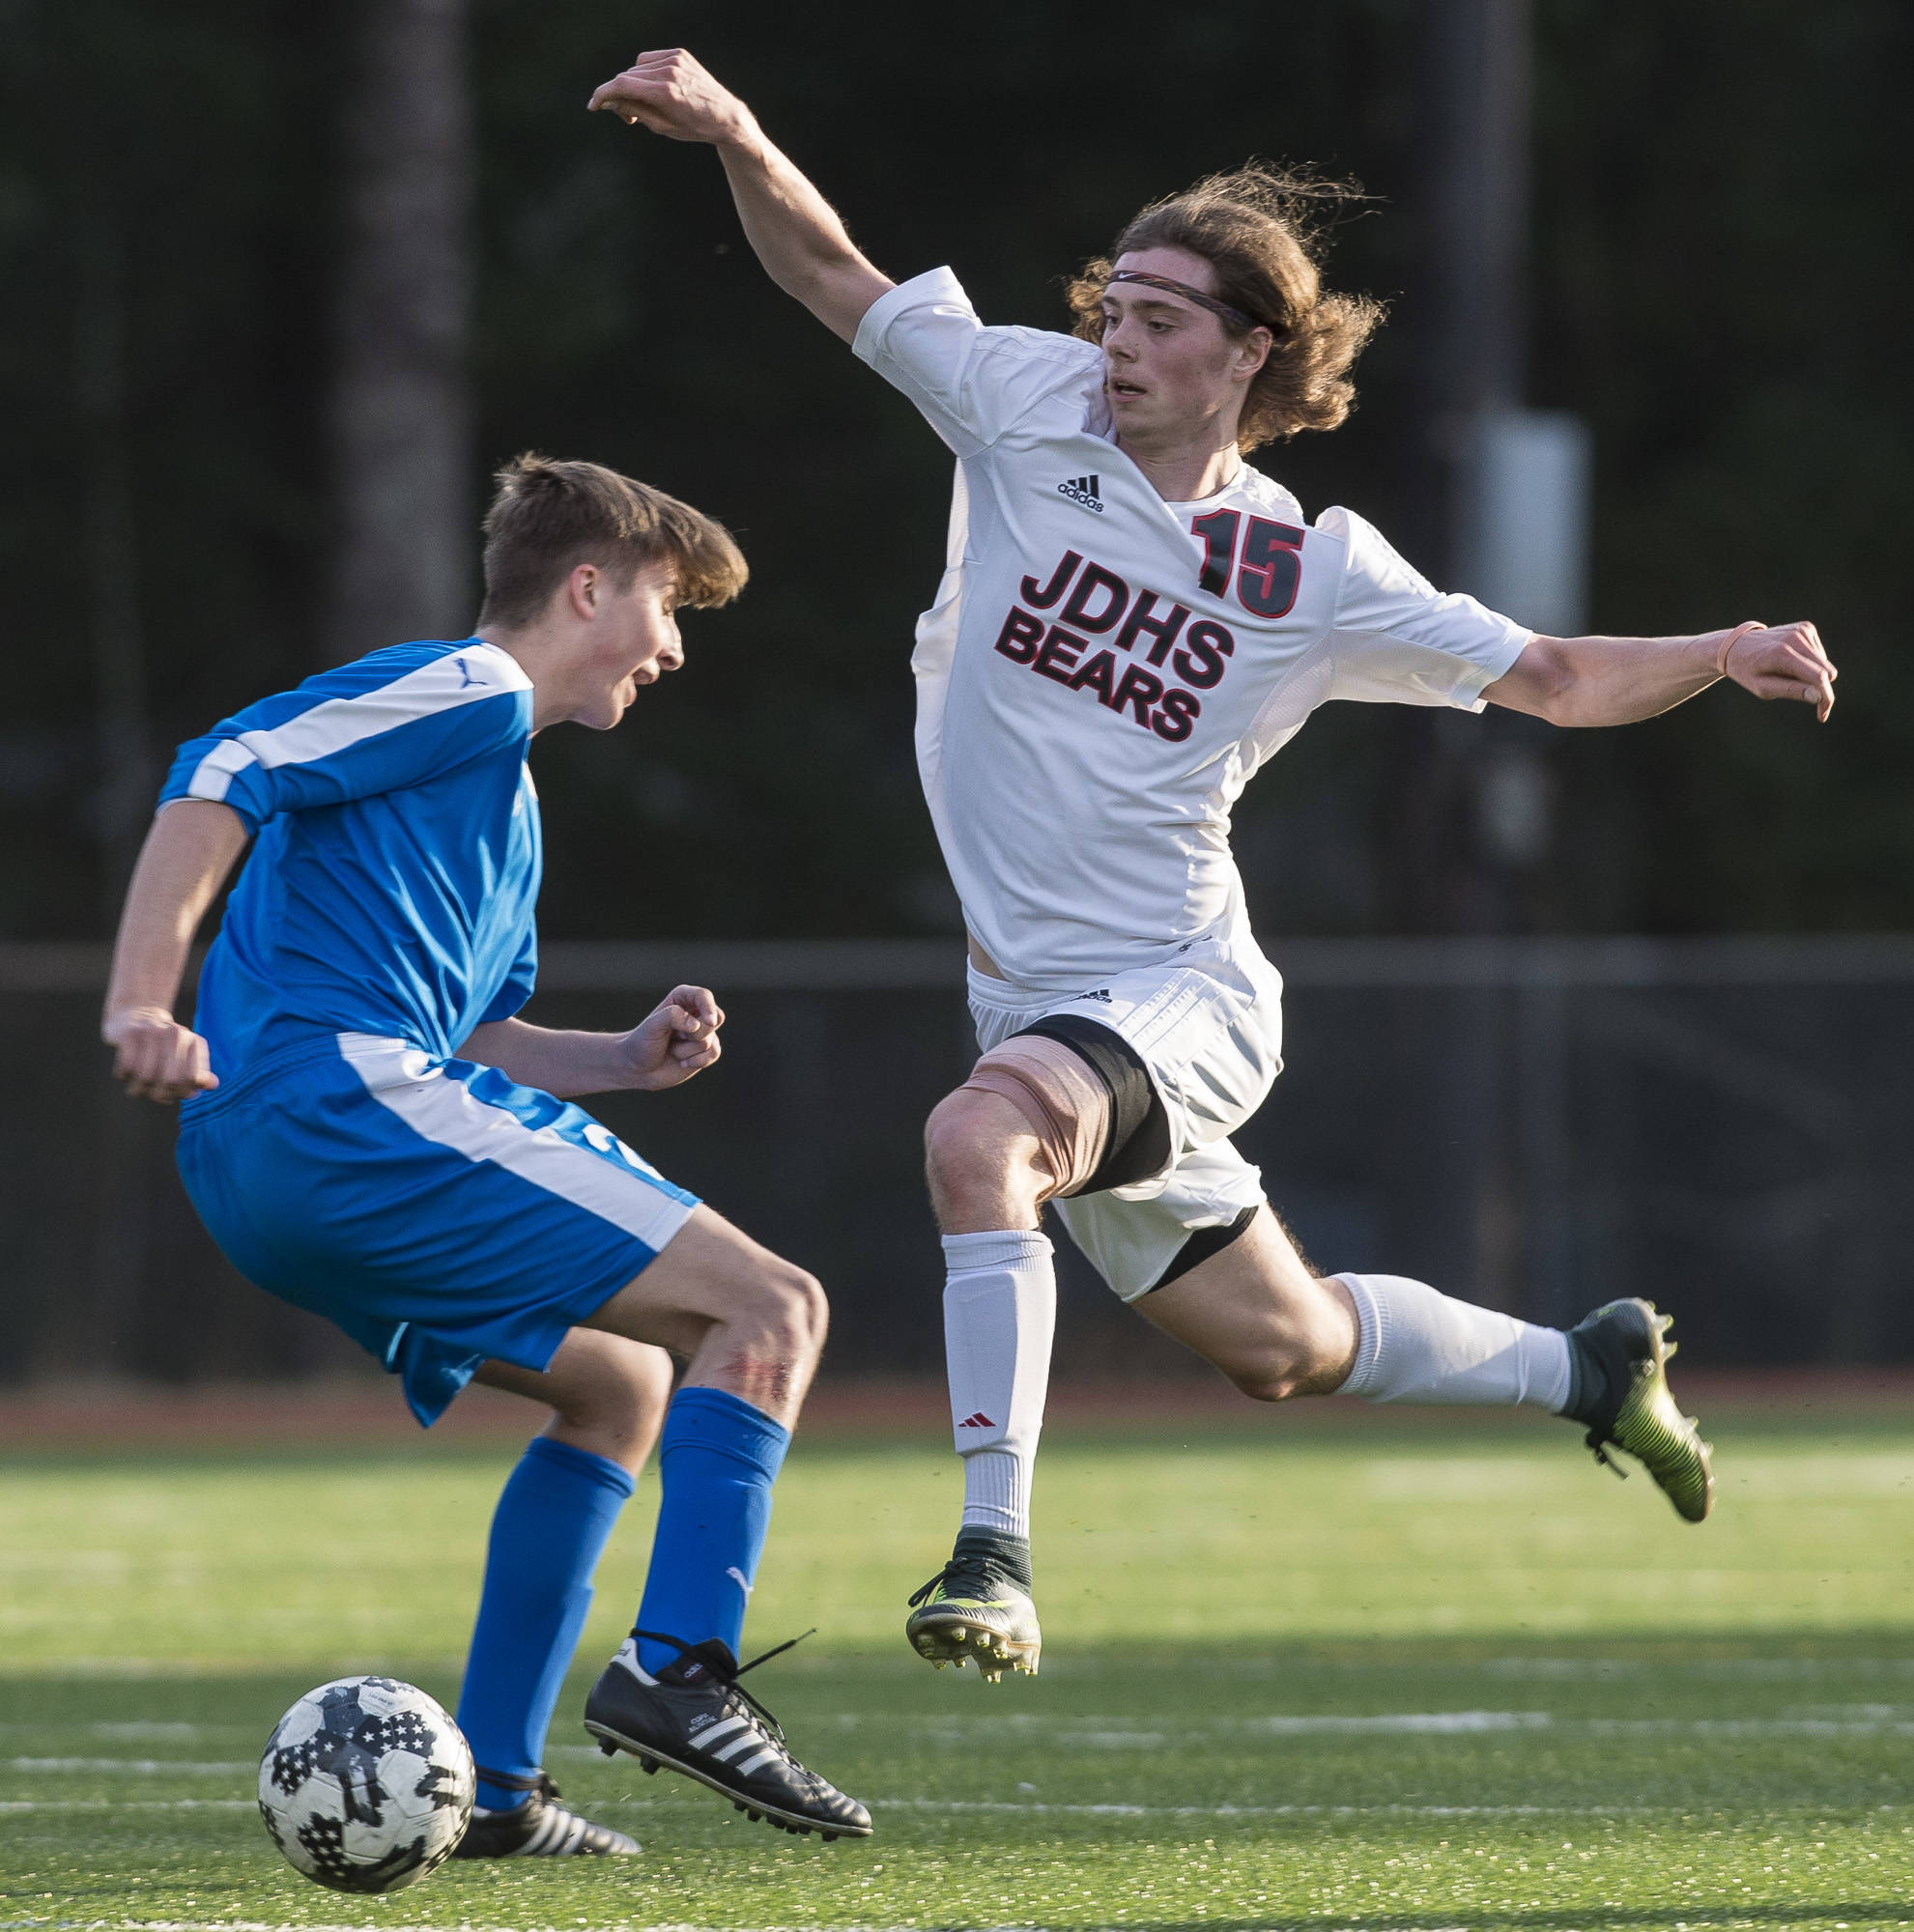 Juneau-Douglas’ Brysen Mitchell evades Thunder Mountain’sKieran Kollar as he drives down field at Adair-Kennedy Memorial Park on Tuesday, May 8, 2018. The game ended in a 2-2 tie. (Michael Penn | Juneau Empire)